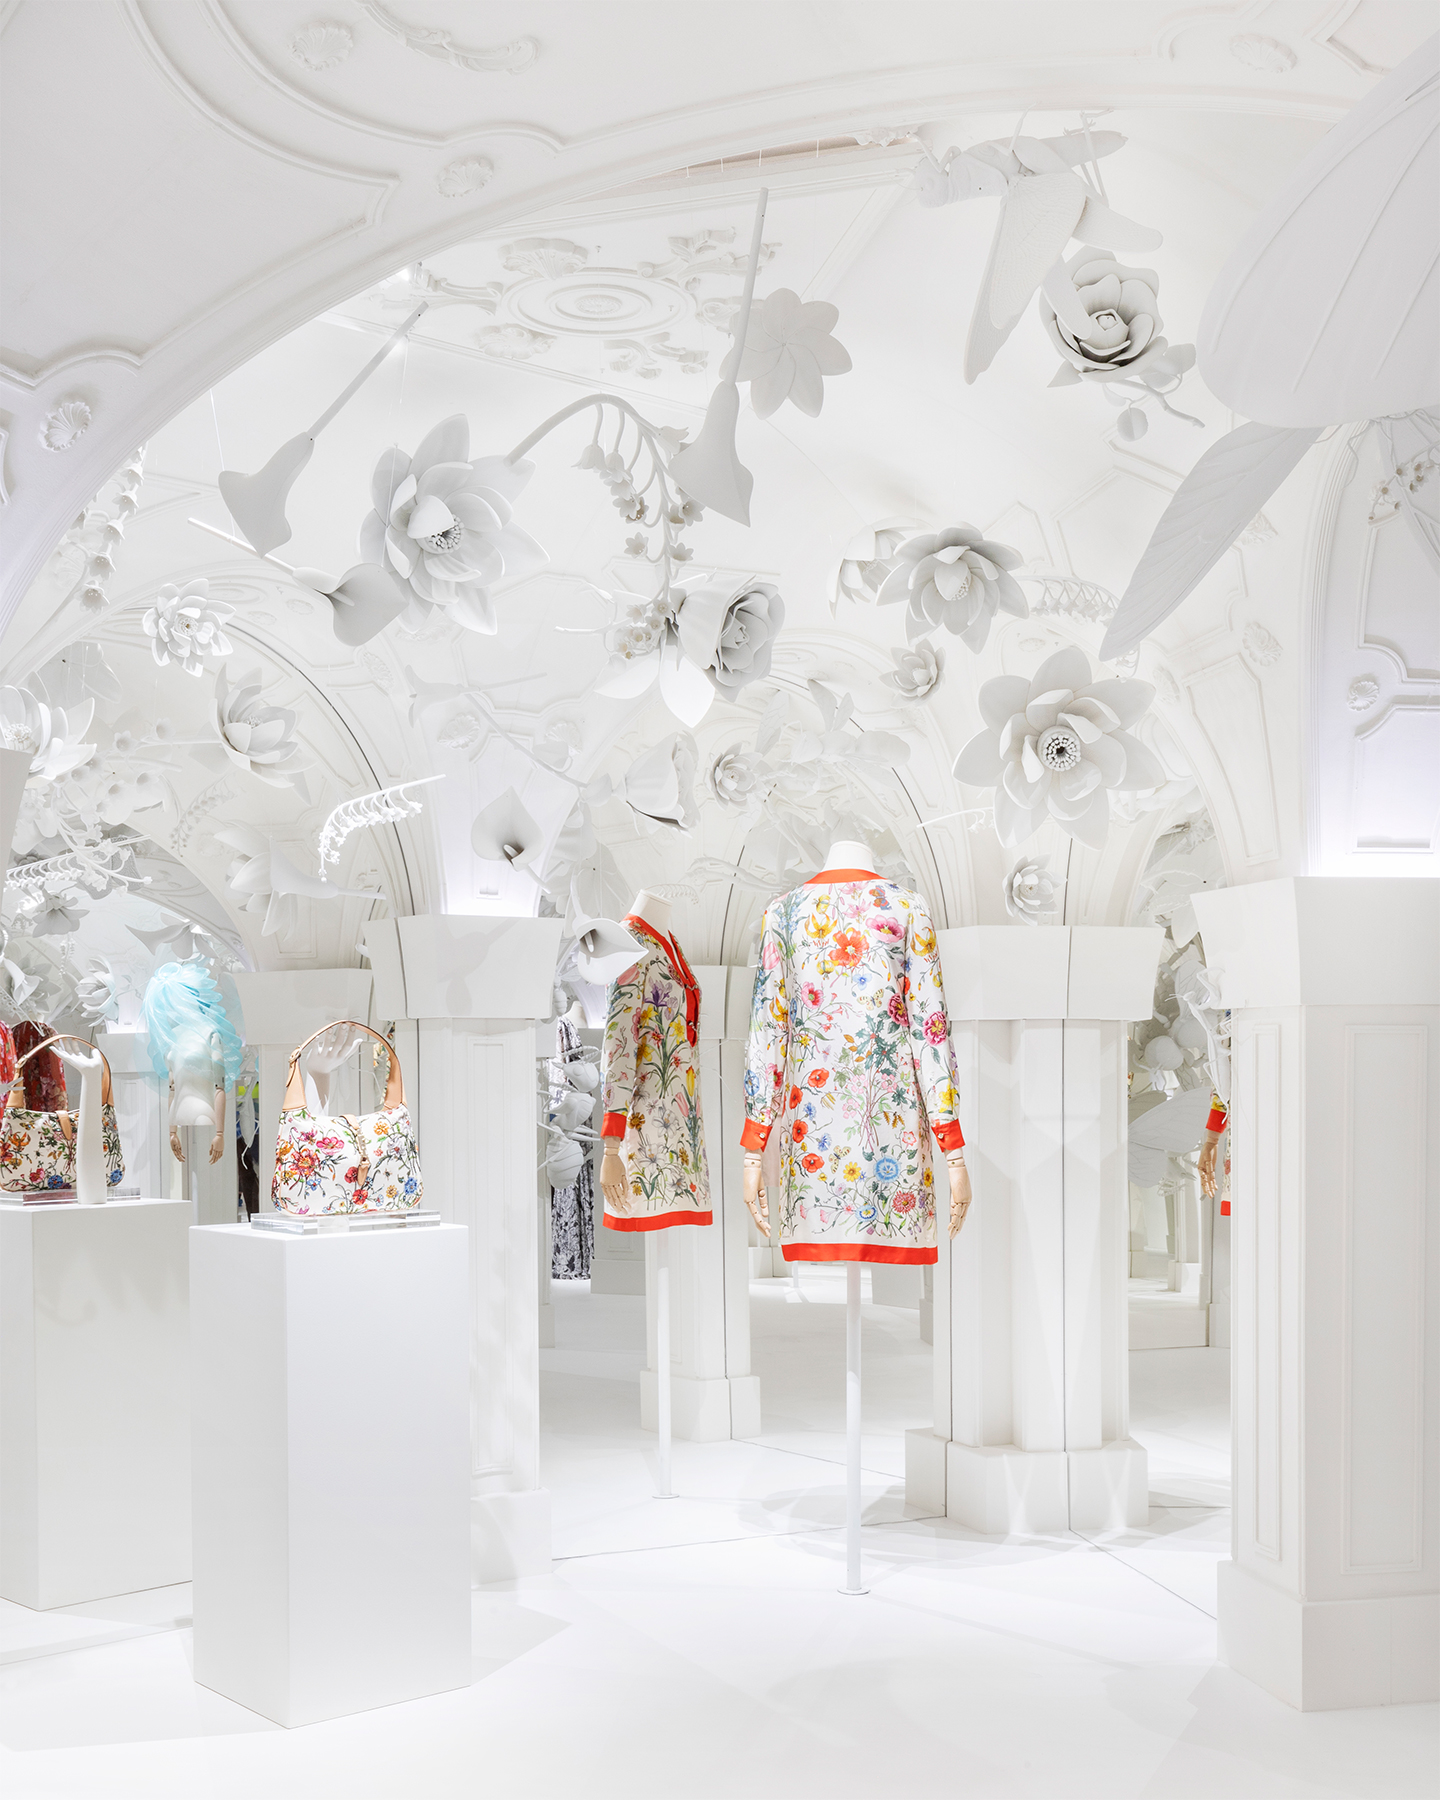 The ‘Eden’ room at the Gucci Cosmos exhibition in London. Courtesy of Gucci